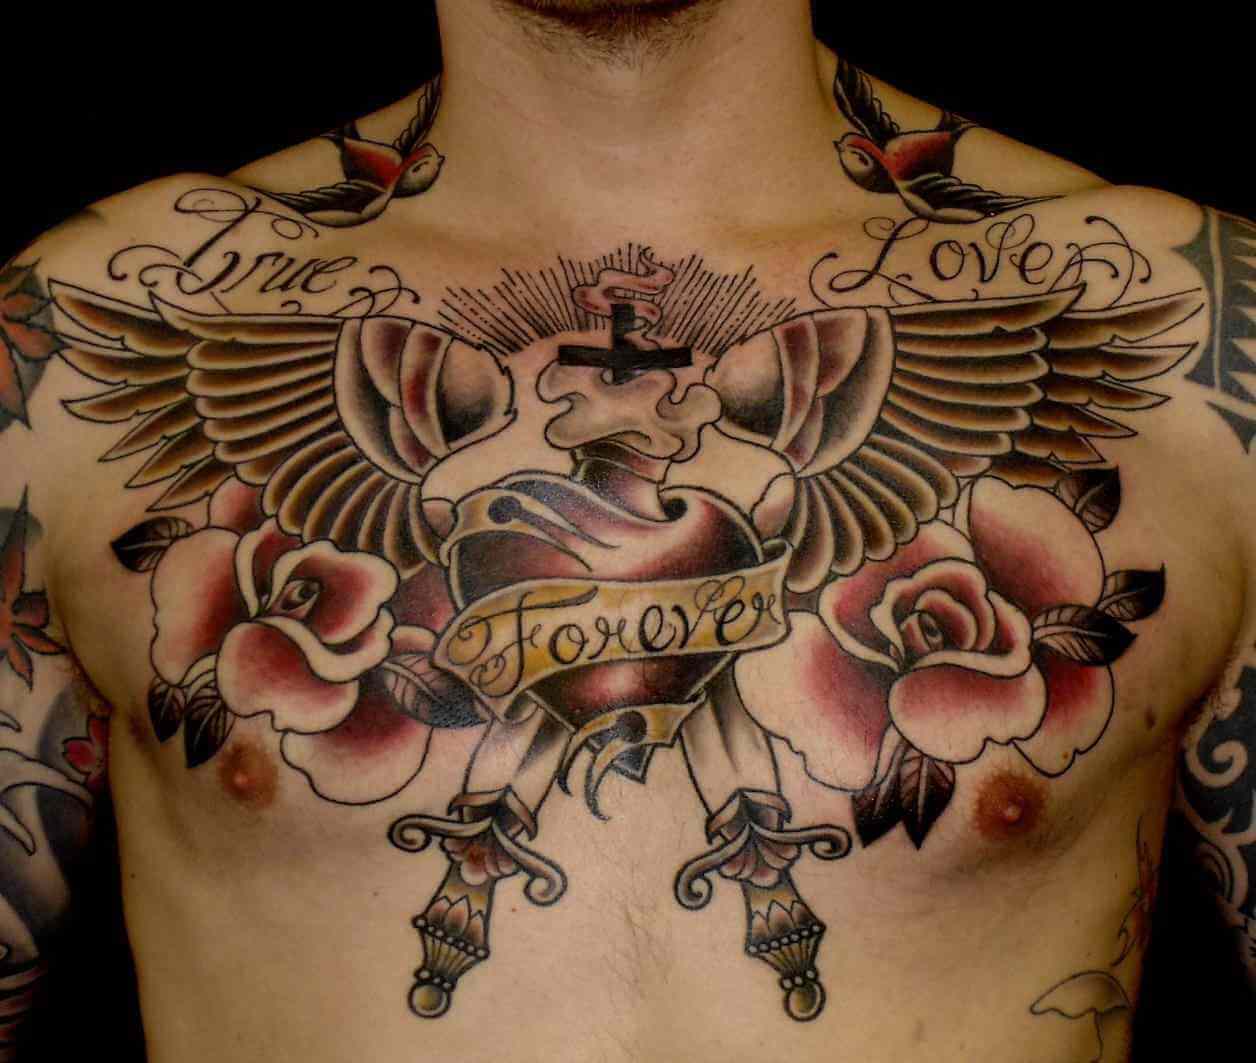 Dagger, Rose, and Wings Chest Tattoo with Cross in the Middle